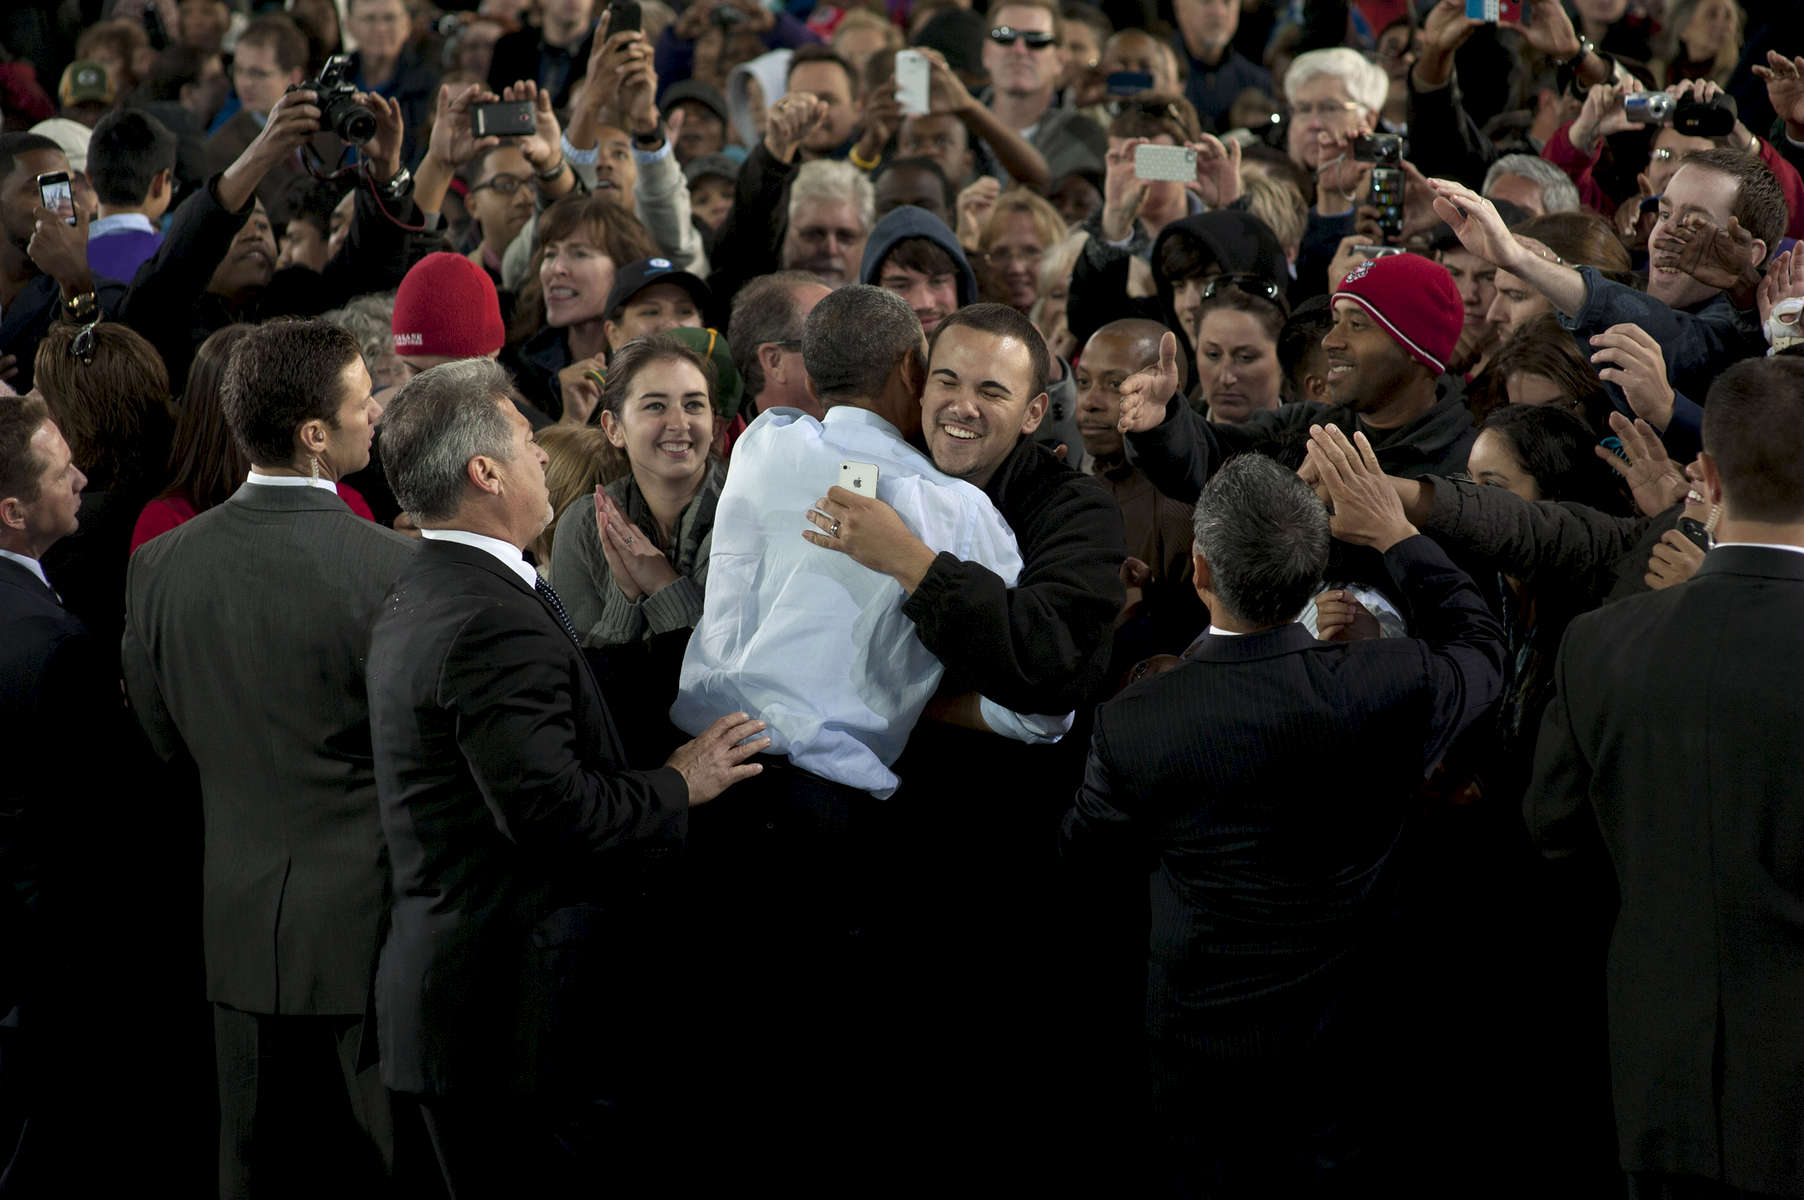 September 22, 2012 - Milwaukee, WI: President Barack Obama embraces a supporter after a rain-soaked campaign event in Milwaukee, WI.  (Scout Tufankjian for Obama for America/Polaris)